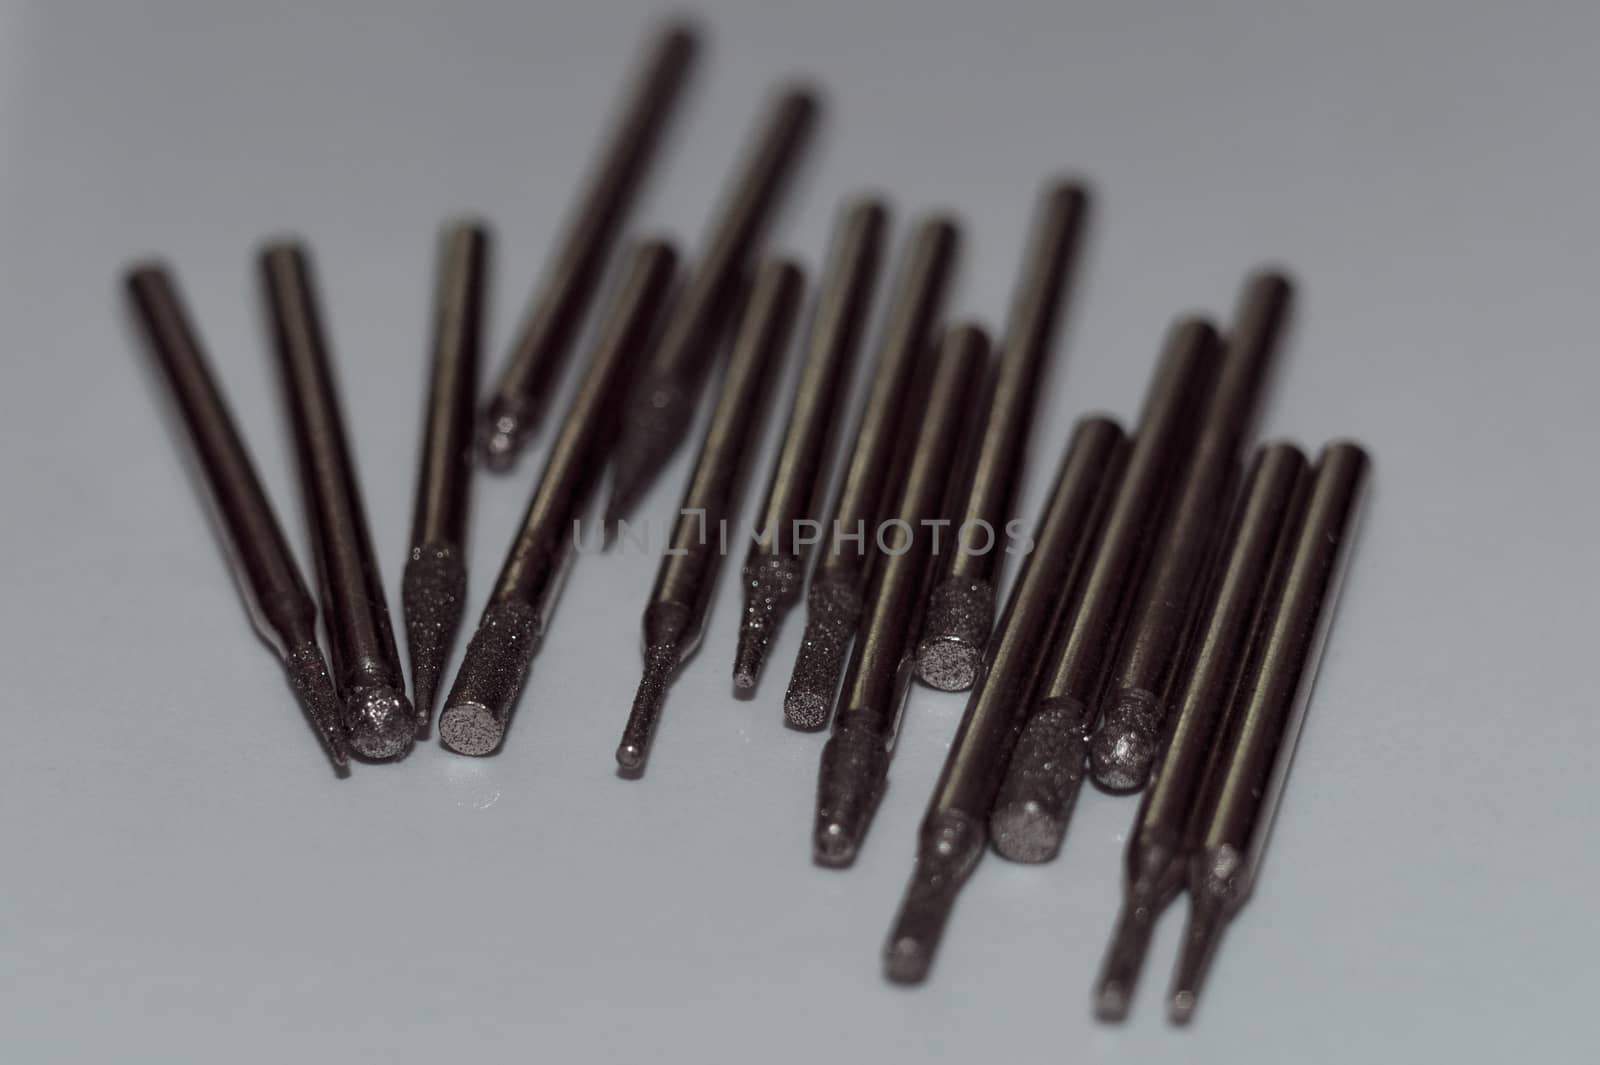 Diamond drill bits on white background. Close-up view. Tools jeweler and dentist. by alexsdriver